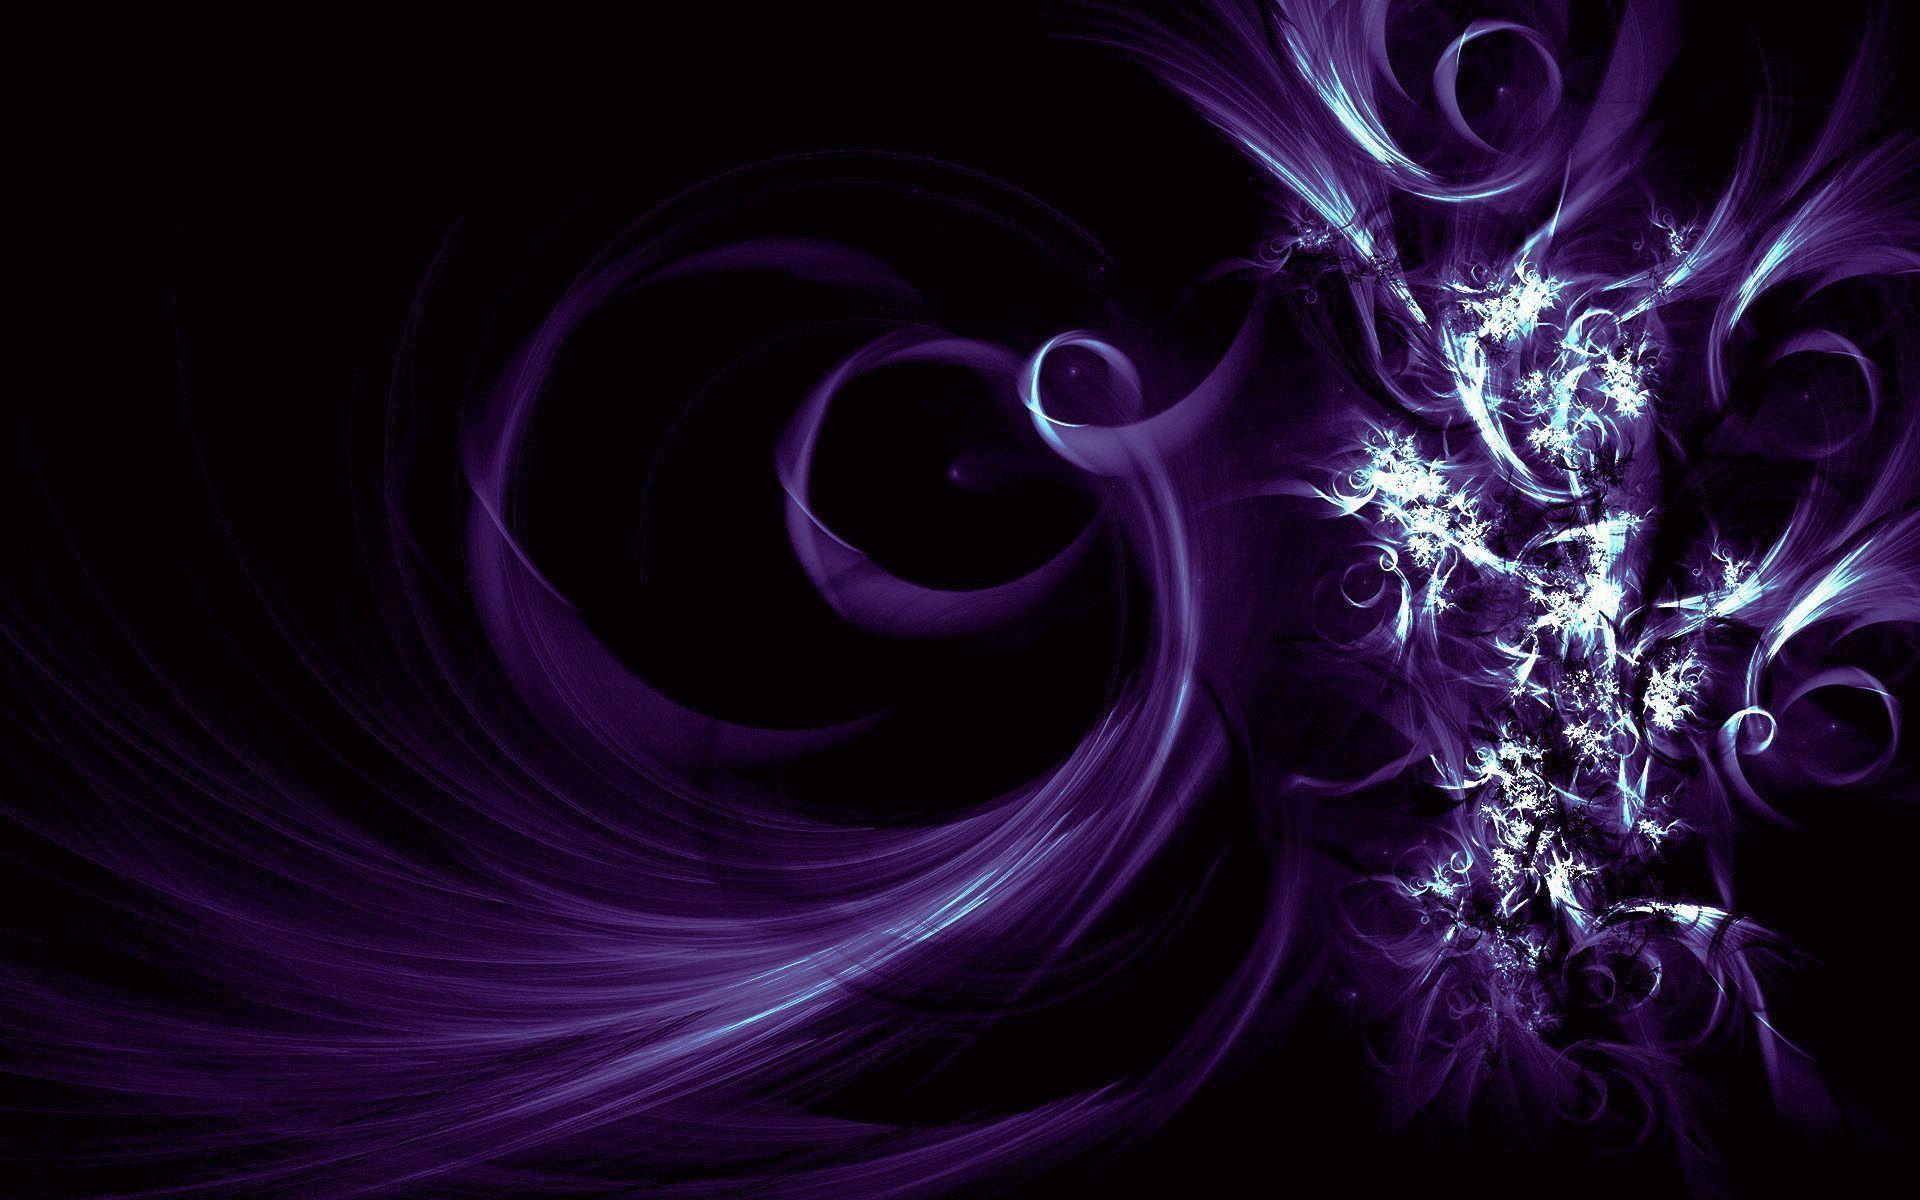 Black And Purple Abstract Wallpaper Image 6 HD Wallpaper